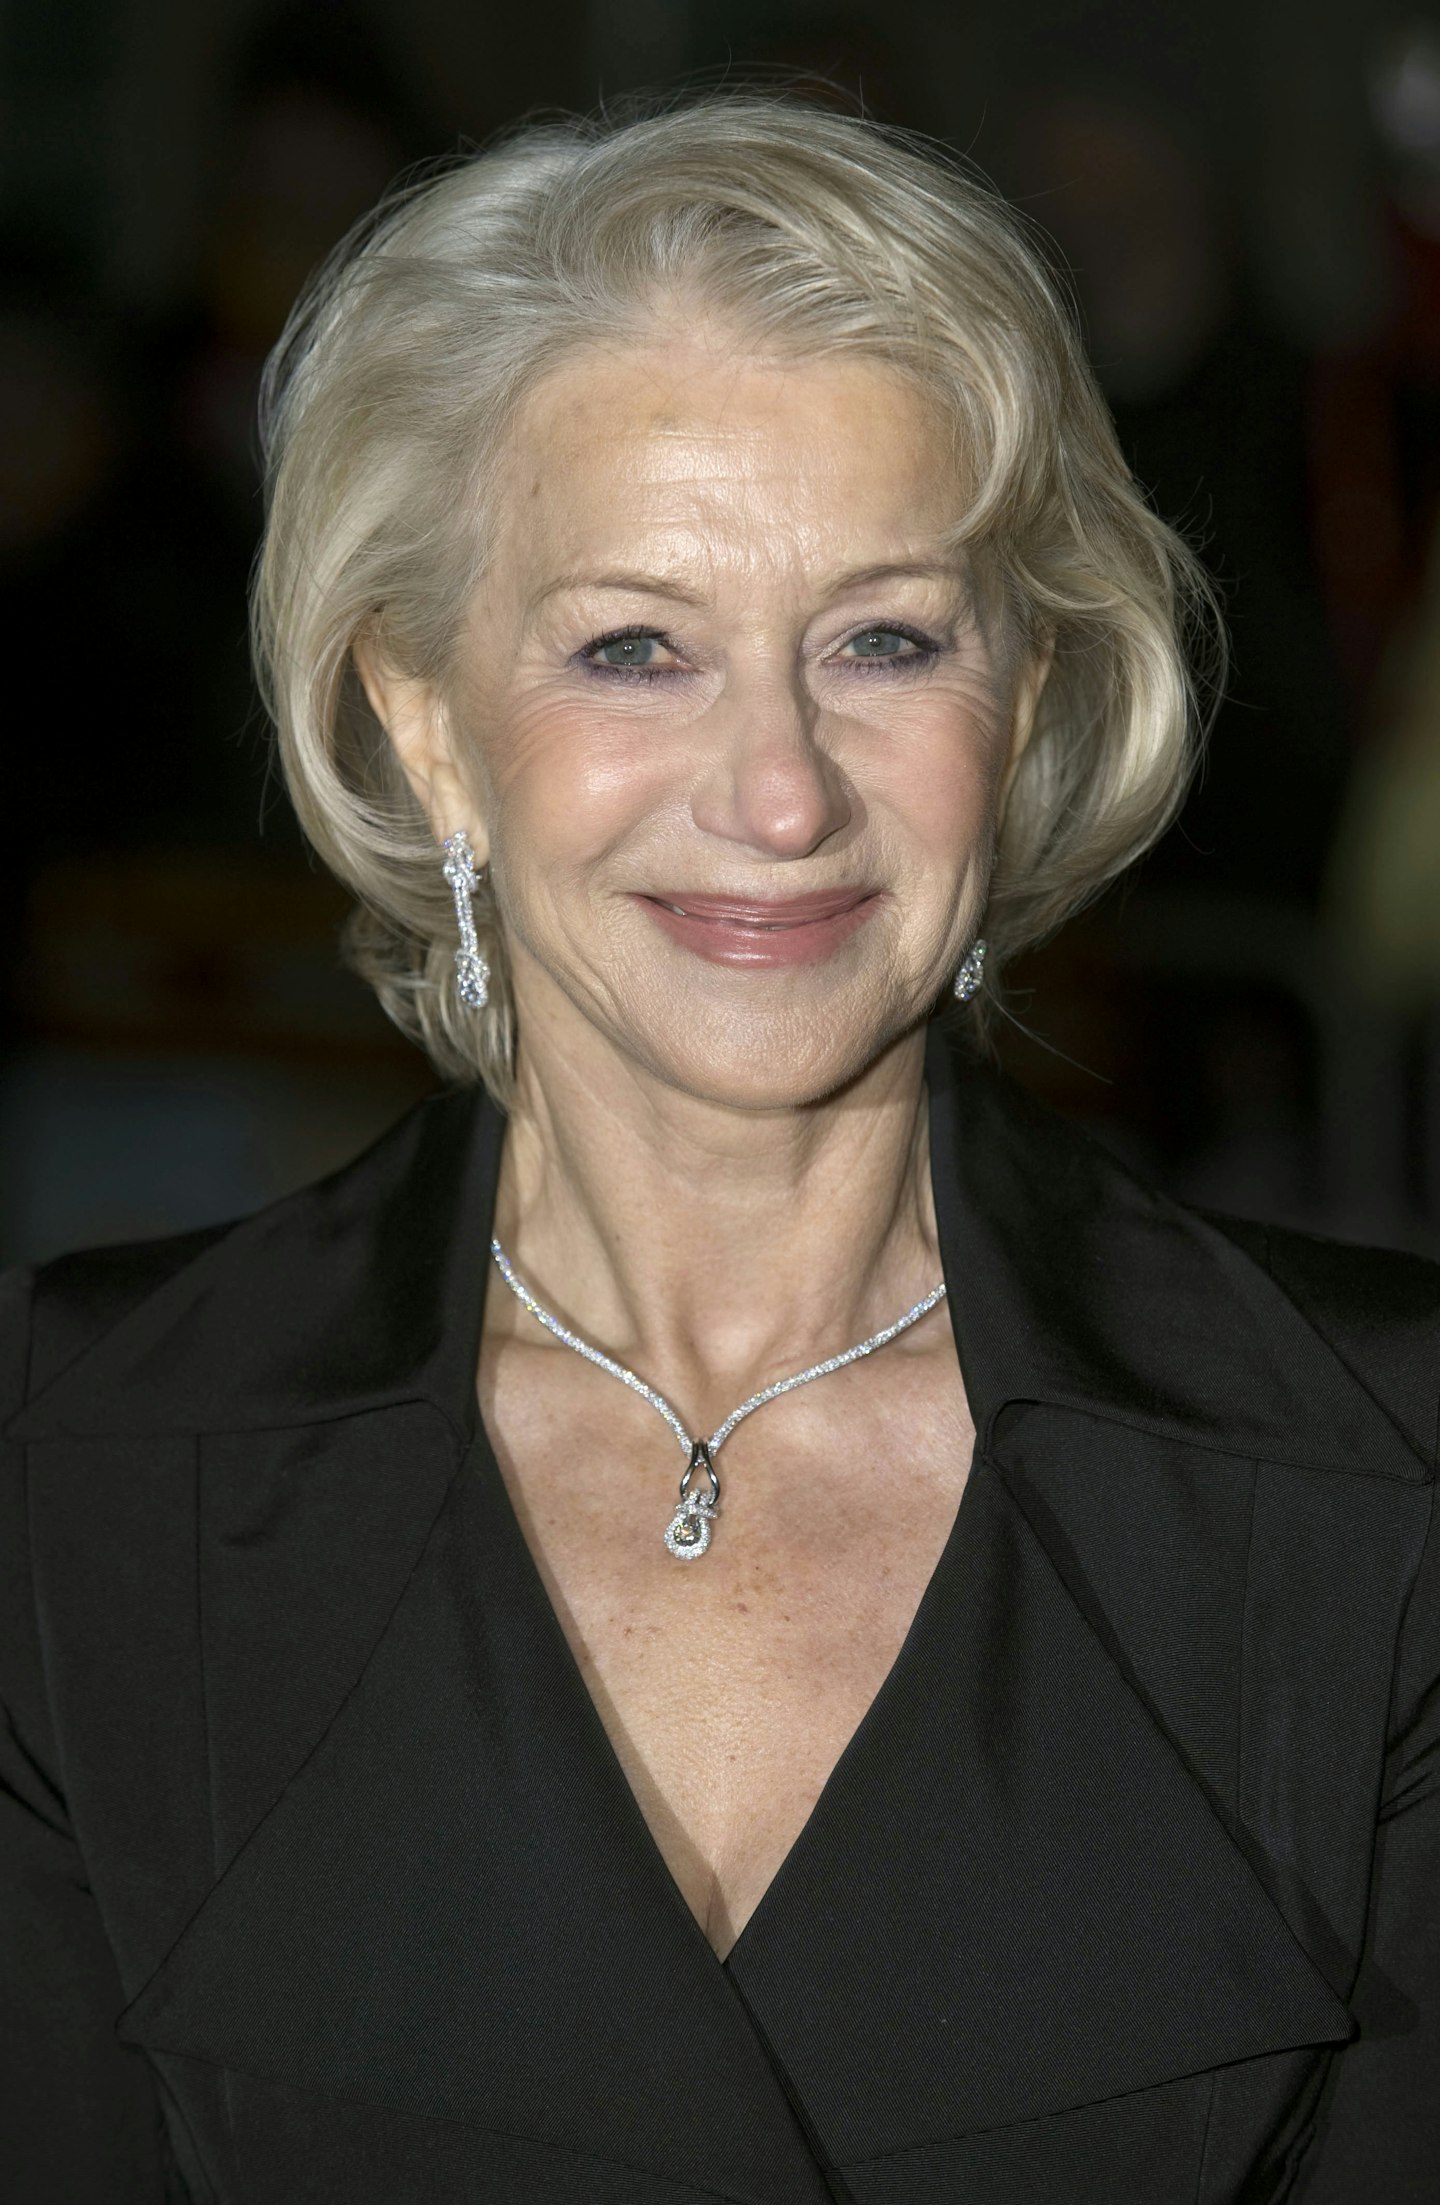 Helen Mirren will be donating her clothes to the charity